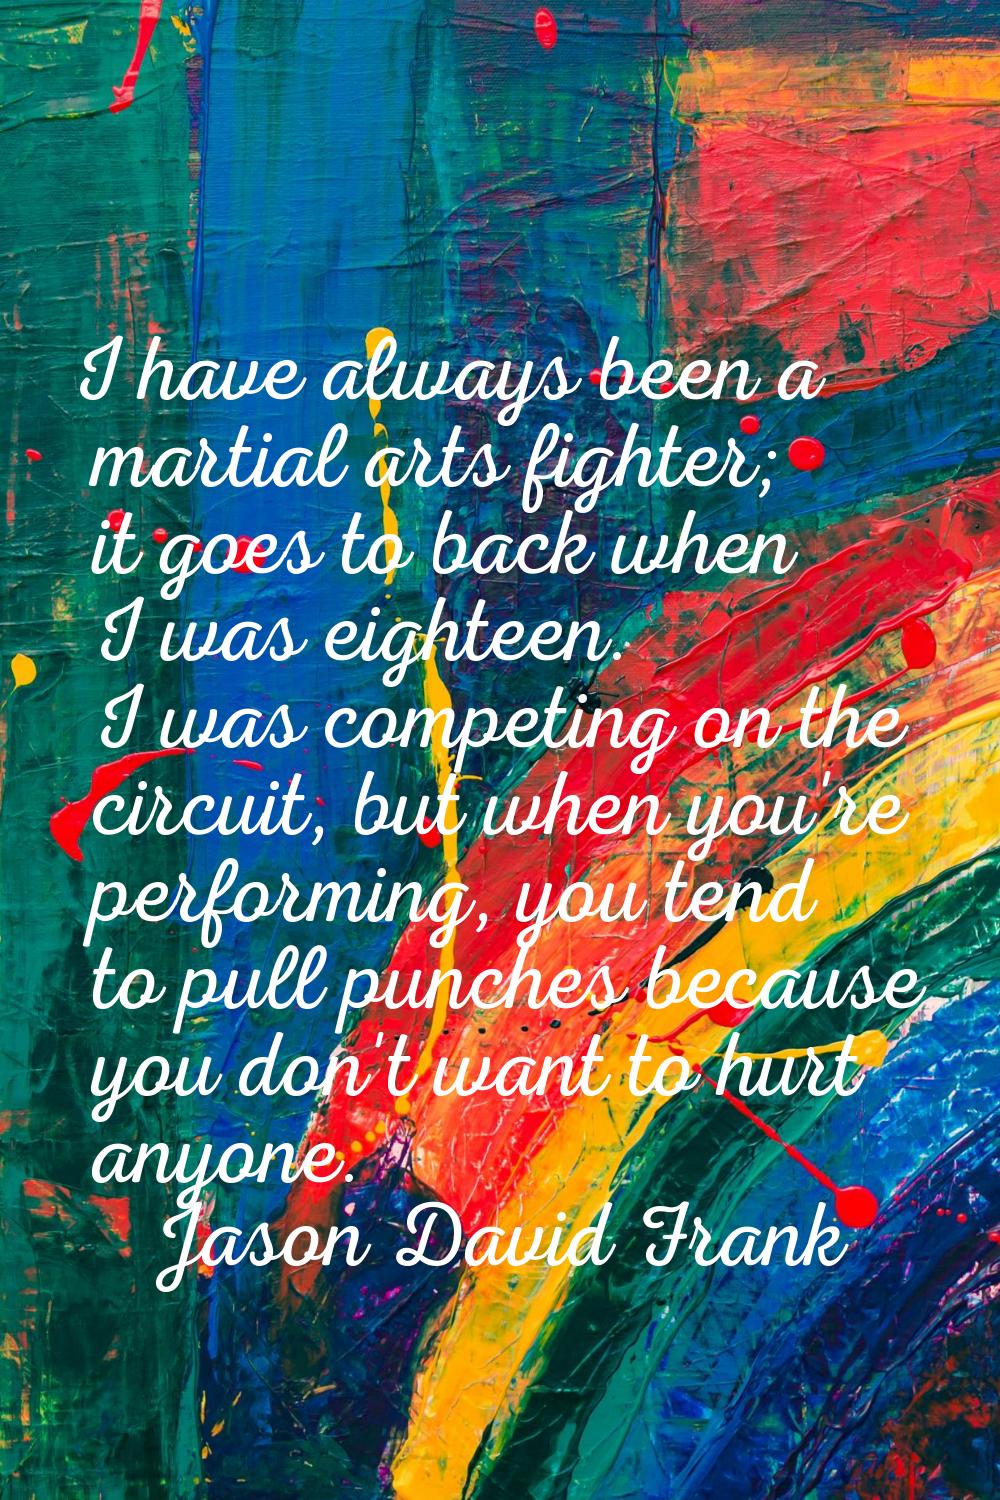 I have always been a martial arts fighter; it goes to back when I was eighteen. I was competing on 